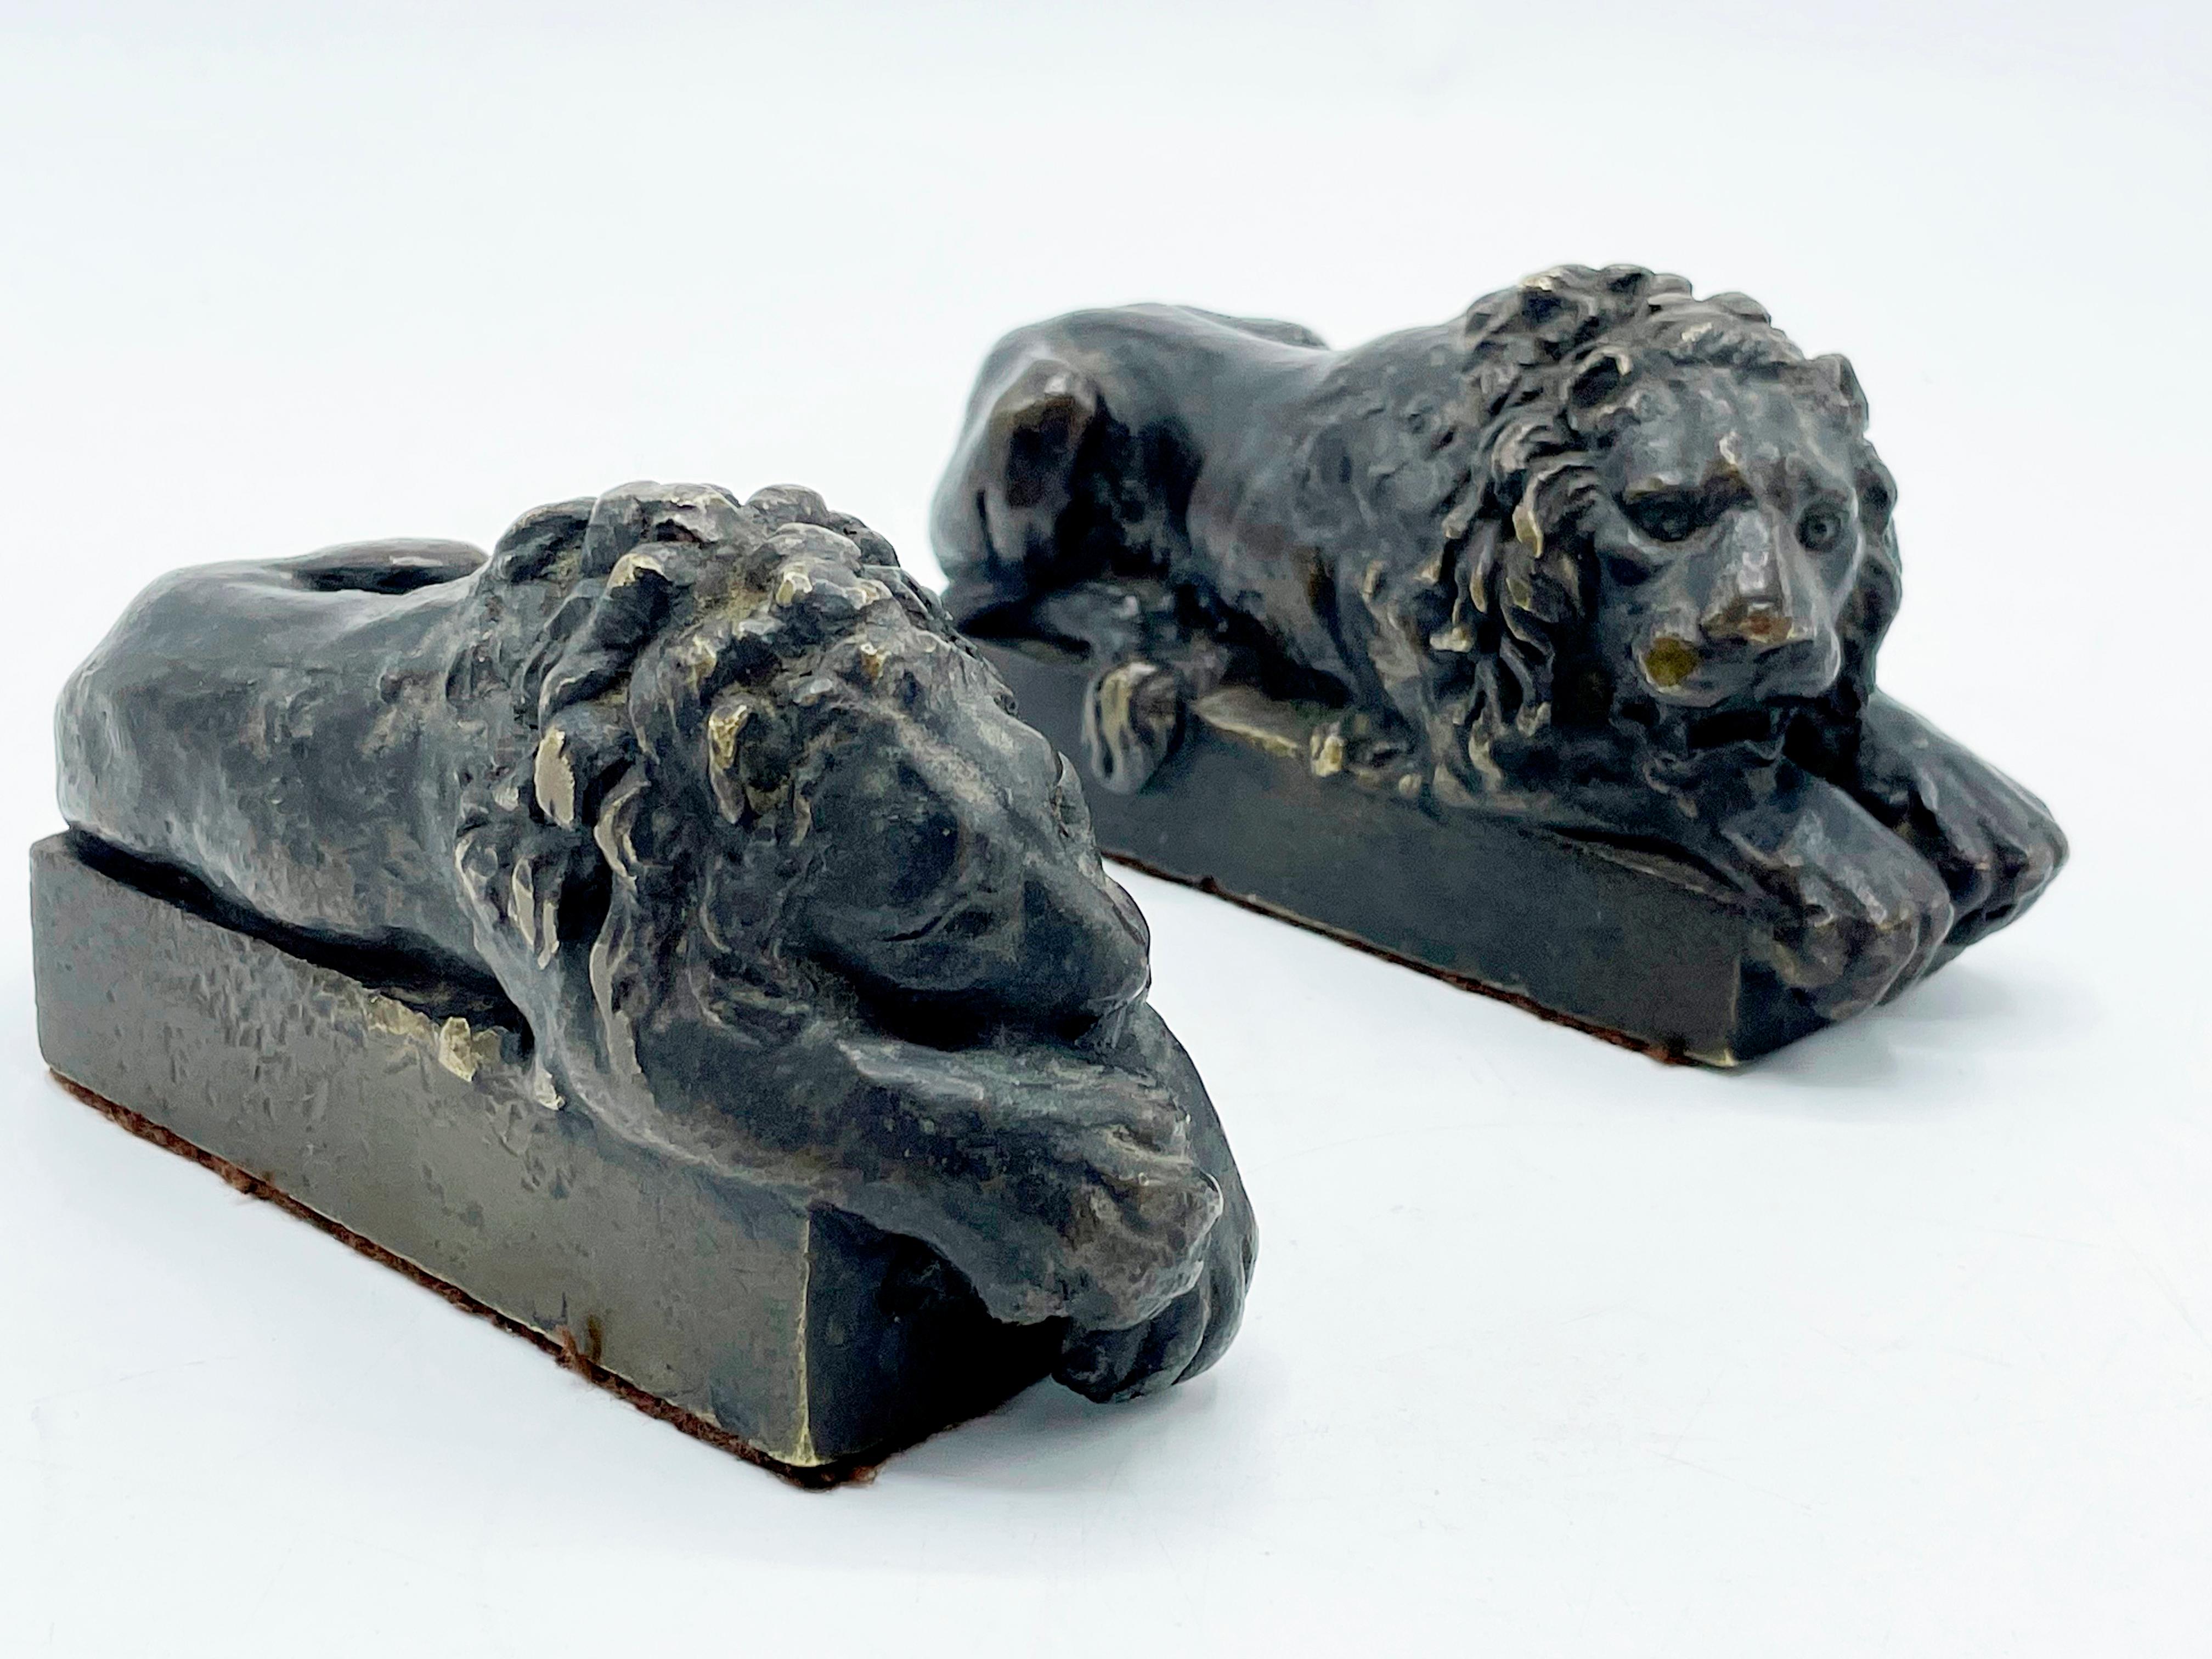 Italian, 19th century, after a model 
by Antonio Canova (1757-1822) A pair of Sculptures lying lions 

These beautiful lions possibly bookends or doorstops are in good condition!

Measures:
6,5 centimeters high
13 centimeters long
4 centimeters width